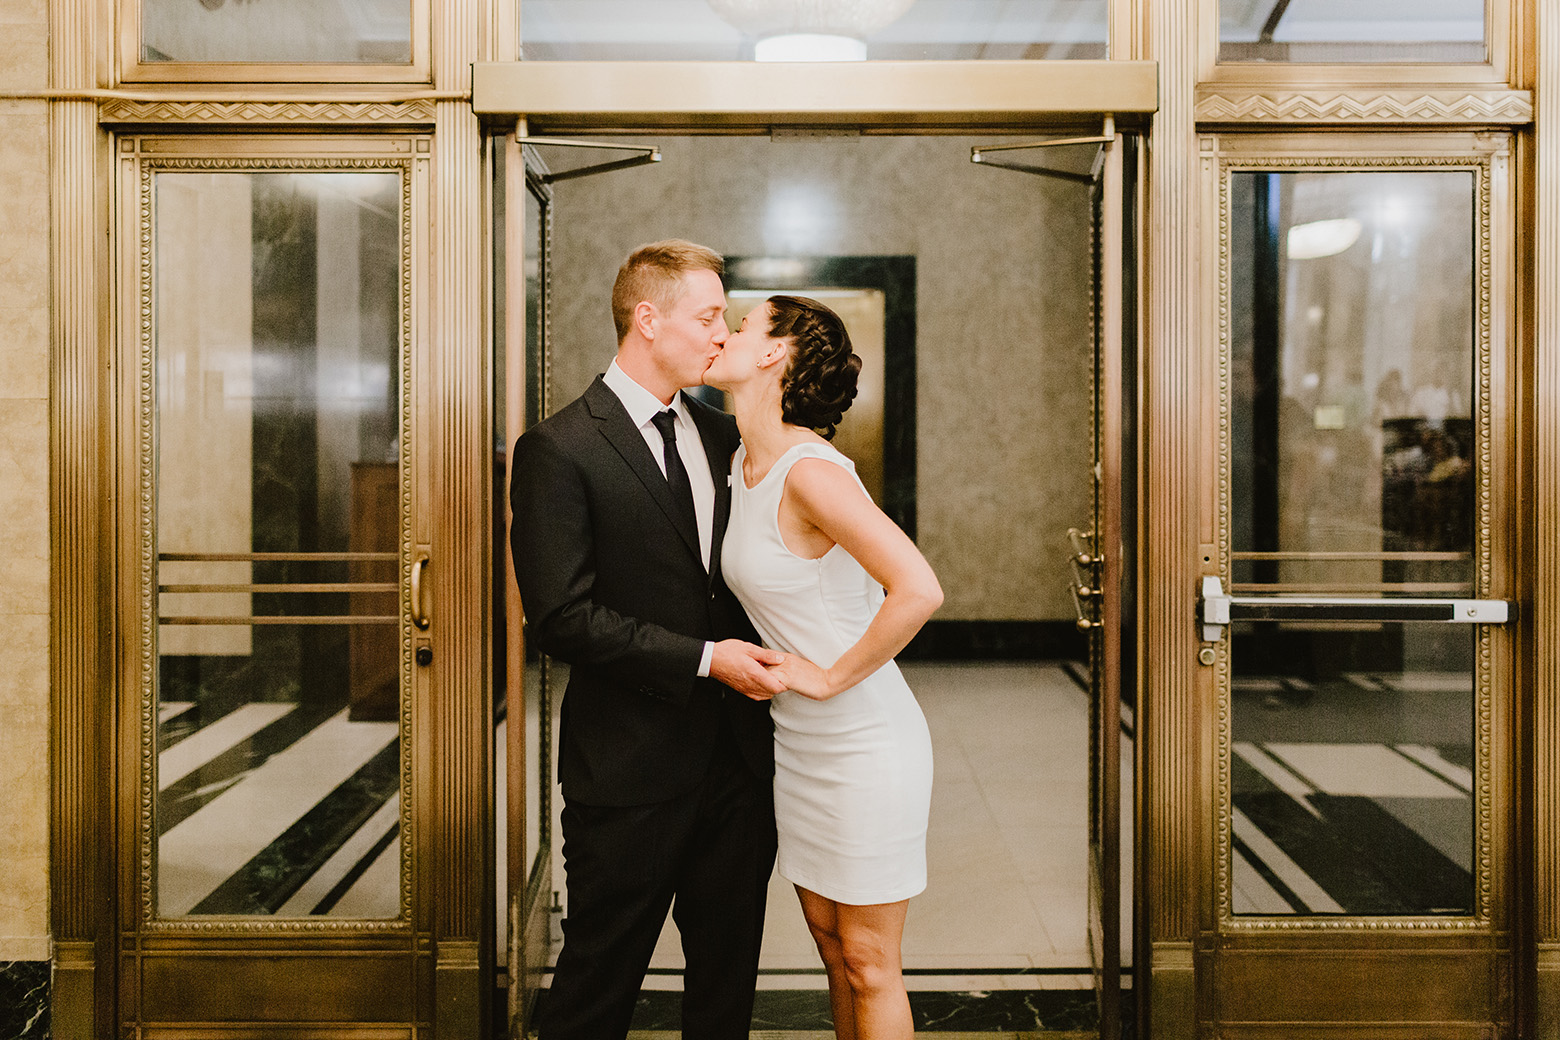 a woman kissing a man in NYC City Hall. The woman is wearing a short white dress while the man is wearing a black suit for their NYC elopement